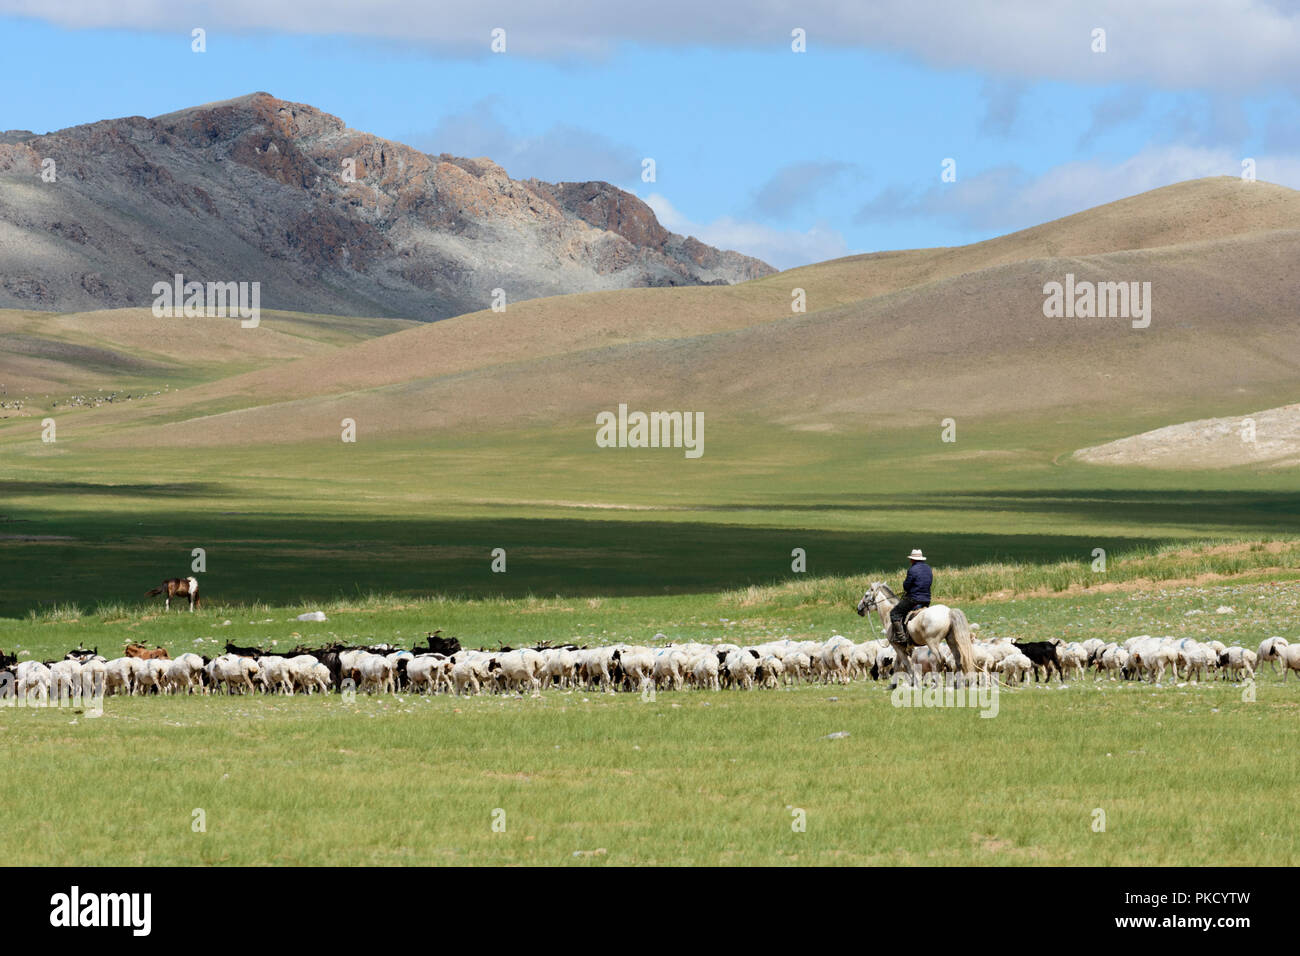 A nomad on horseback and his herd of sheep and goats on the steppe. Mongolia Stock Photo